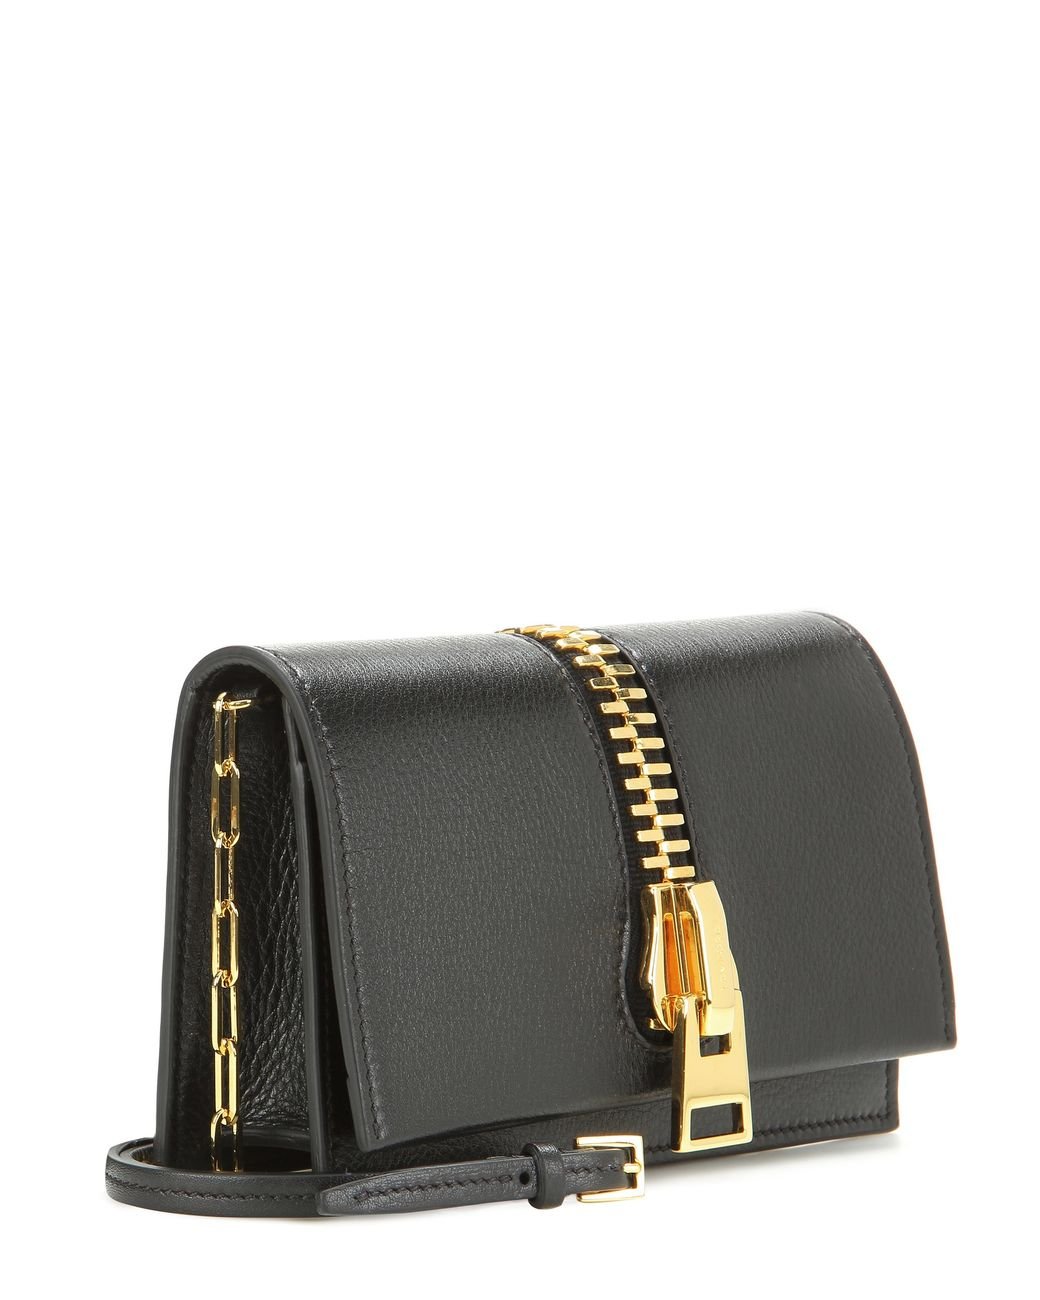 Tom Ford Small Zip Front Leather Shoulder Bag in Black | Lyst